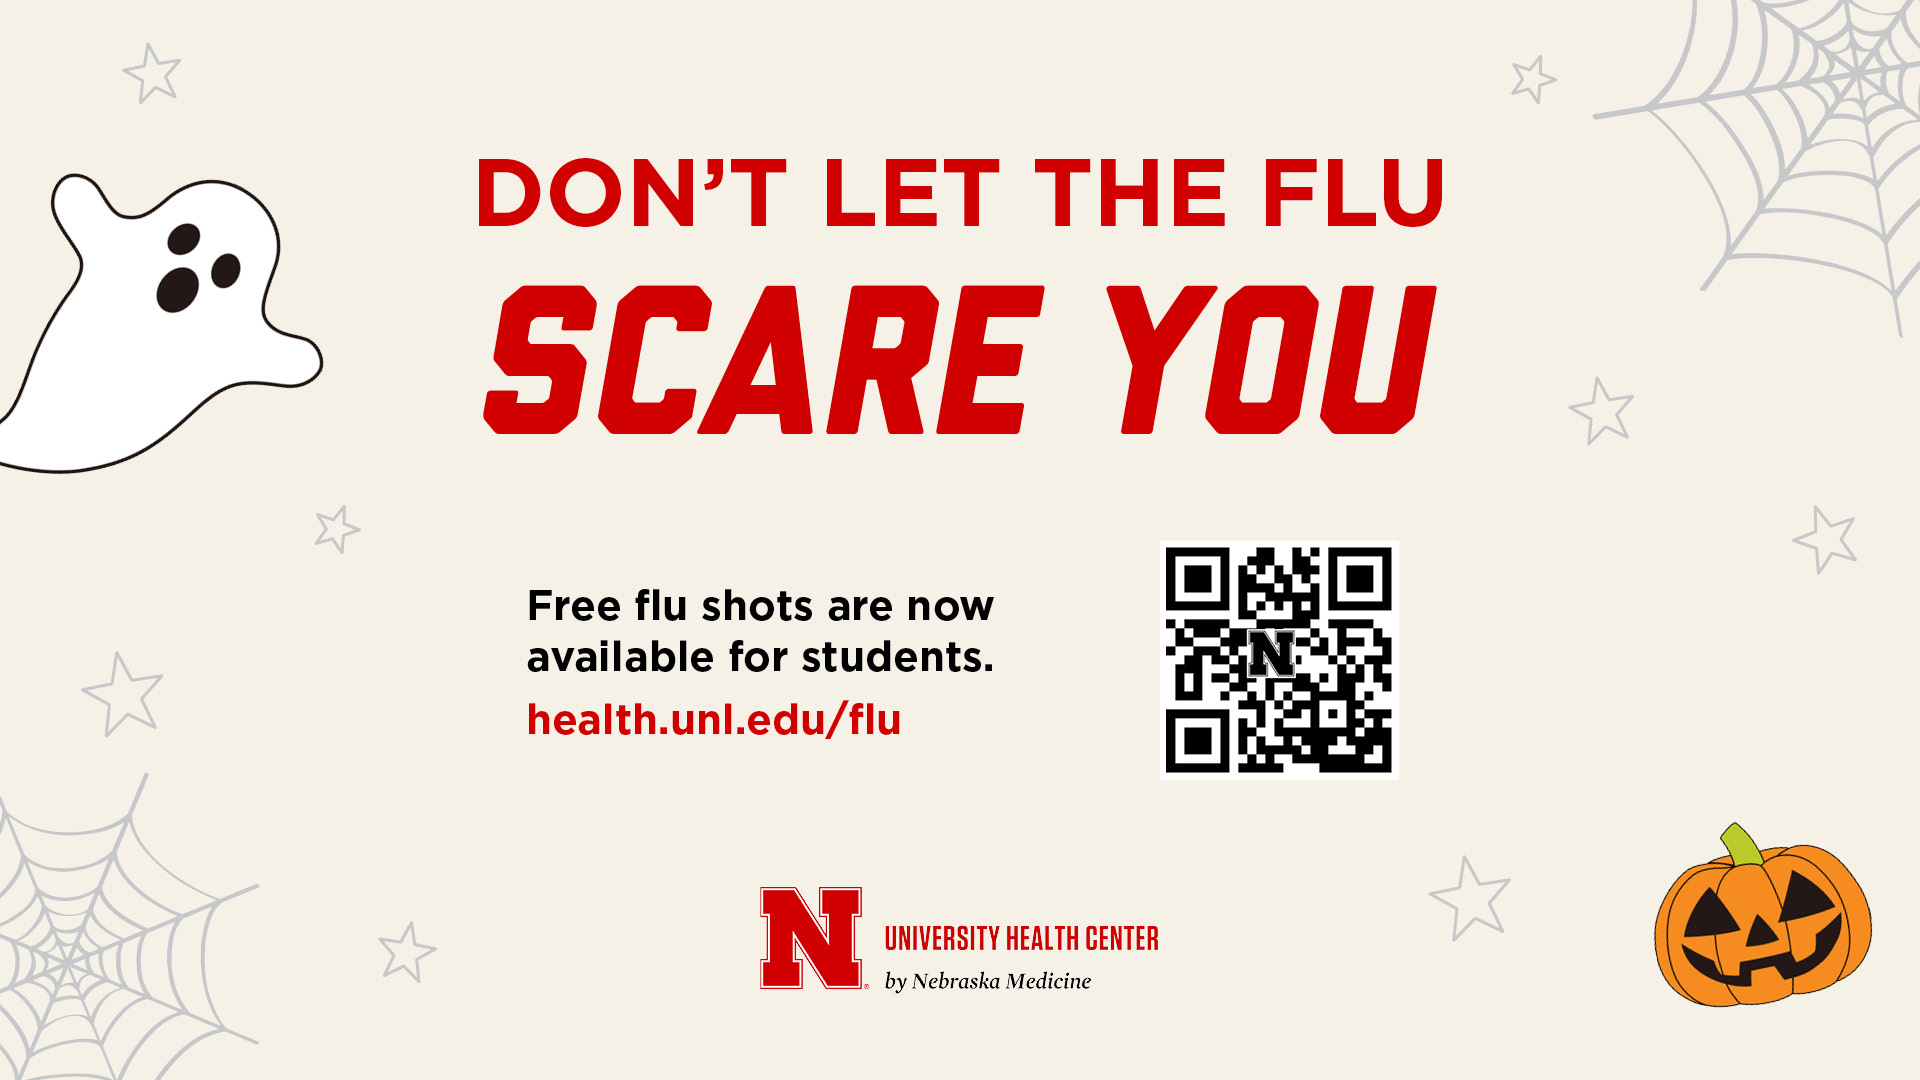 Flu shots are now available on campus